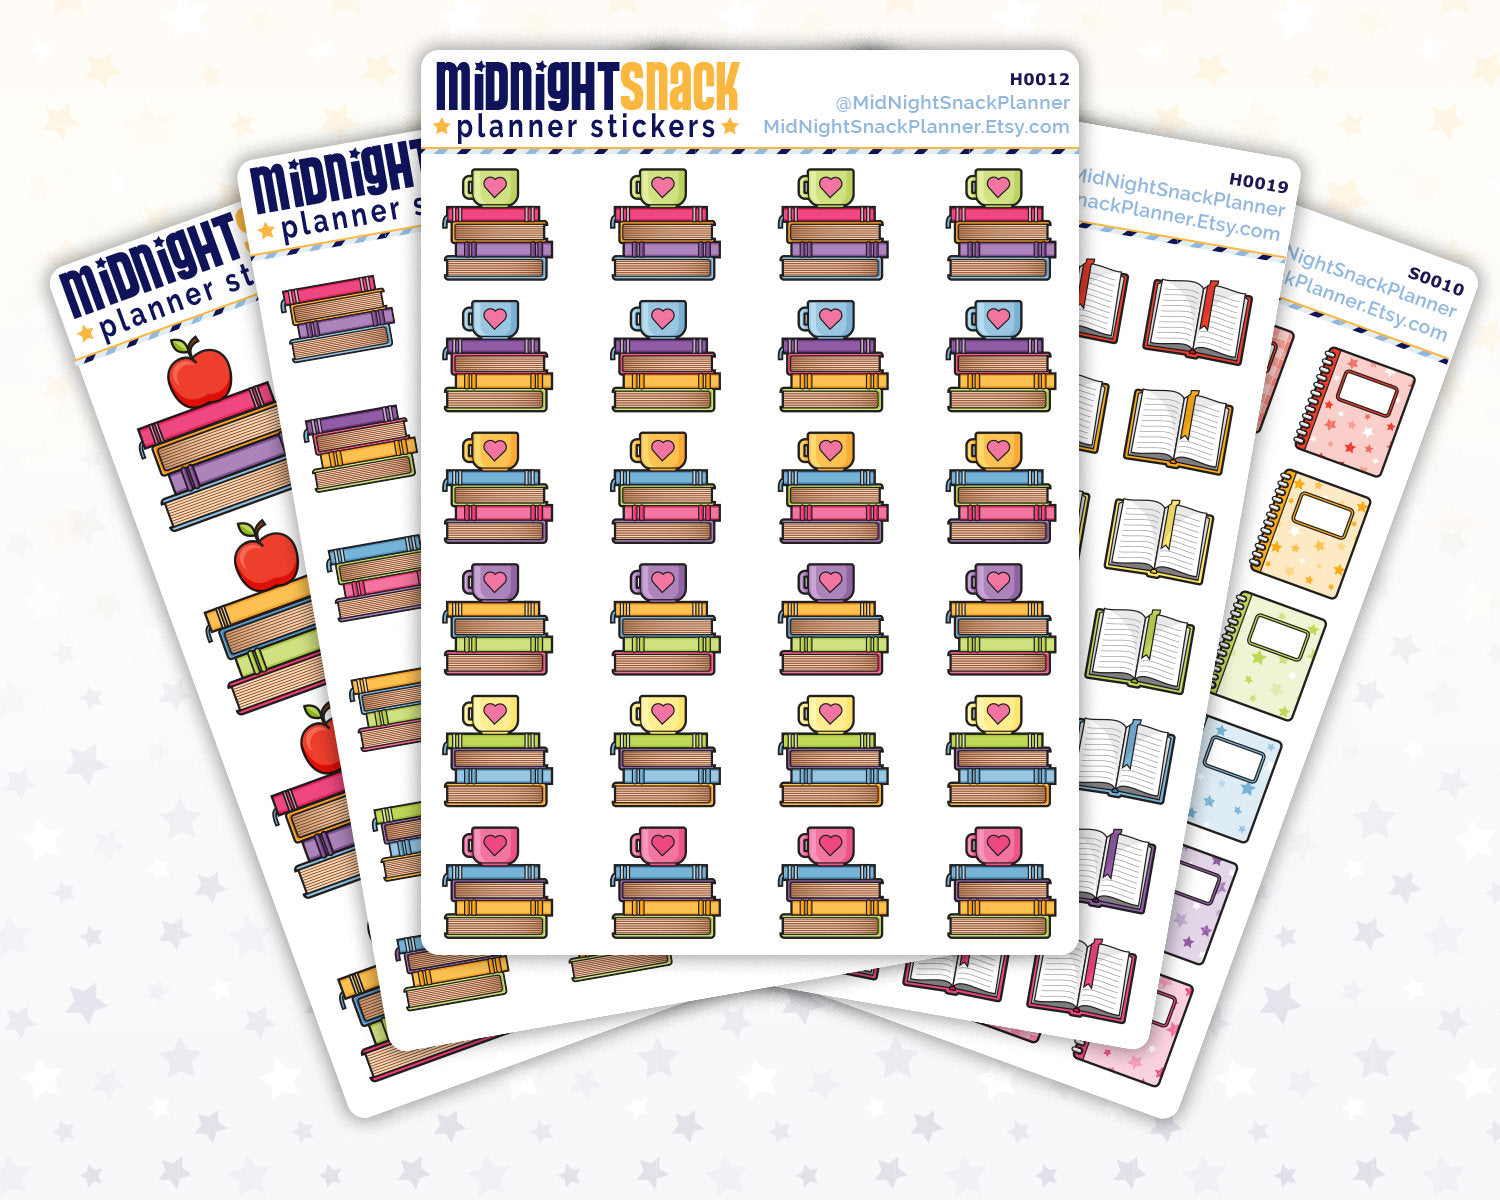 5 Sheet Bundle of Reading Planner Stickers from Midnight Snack Planner